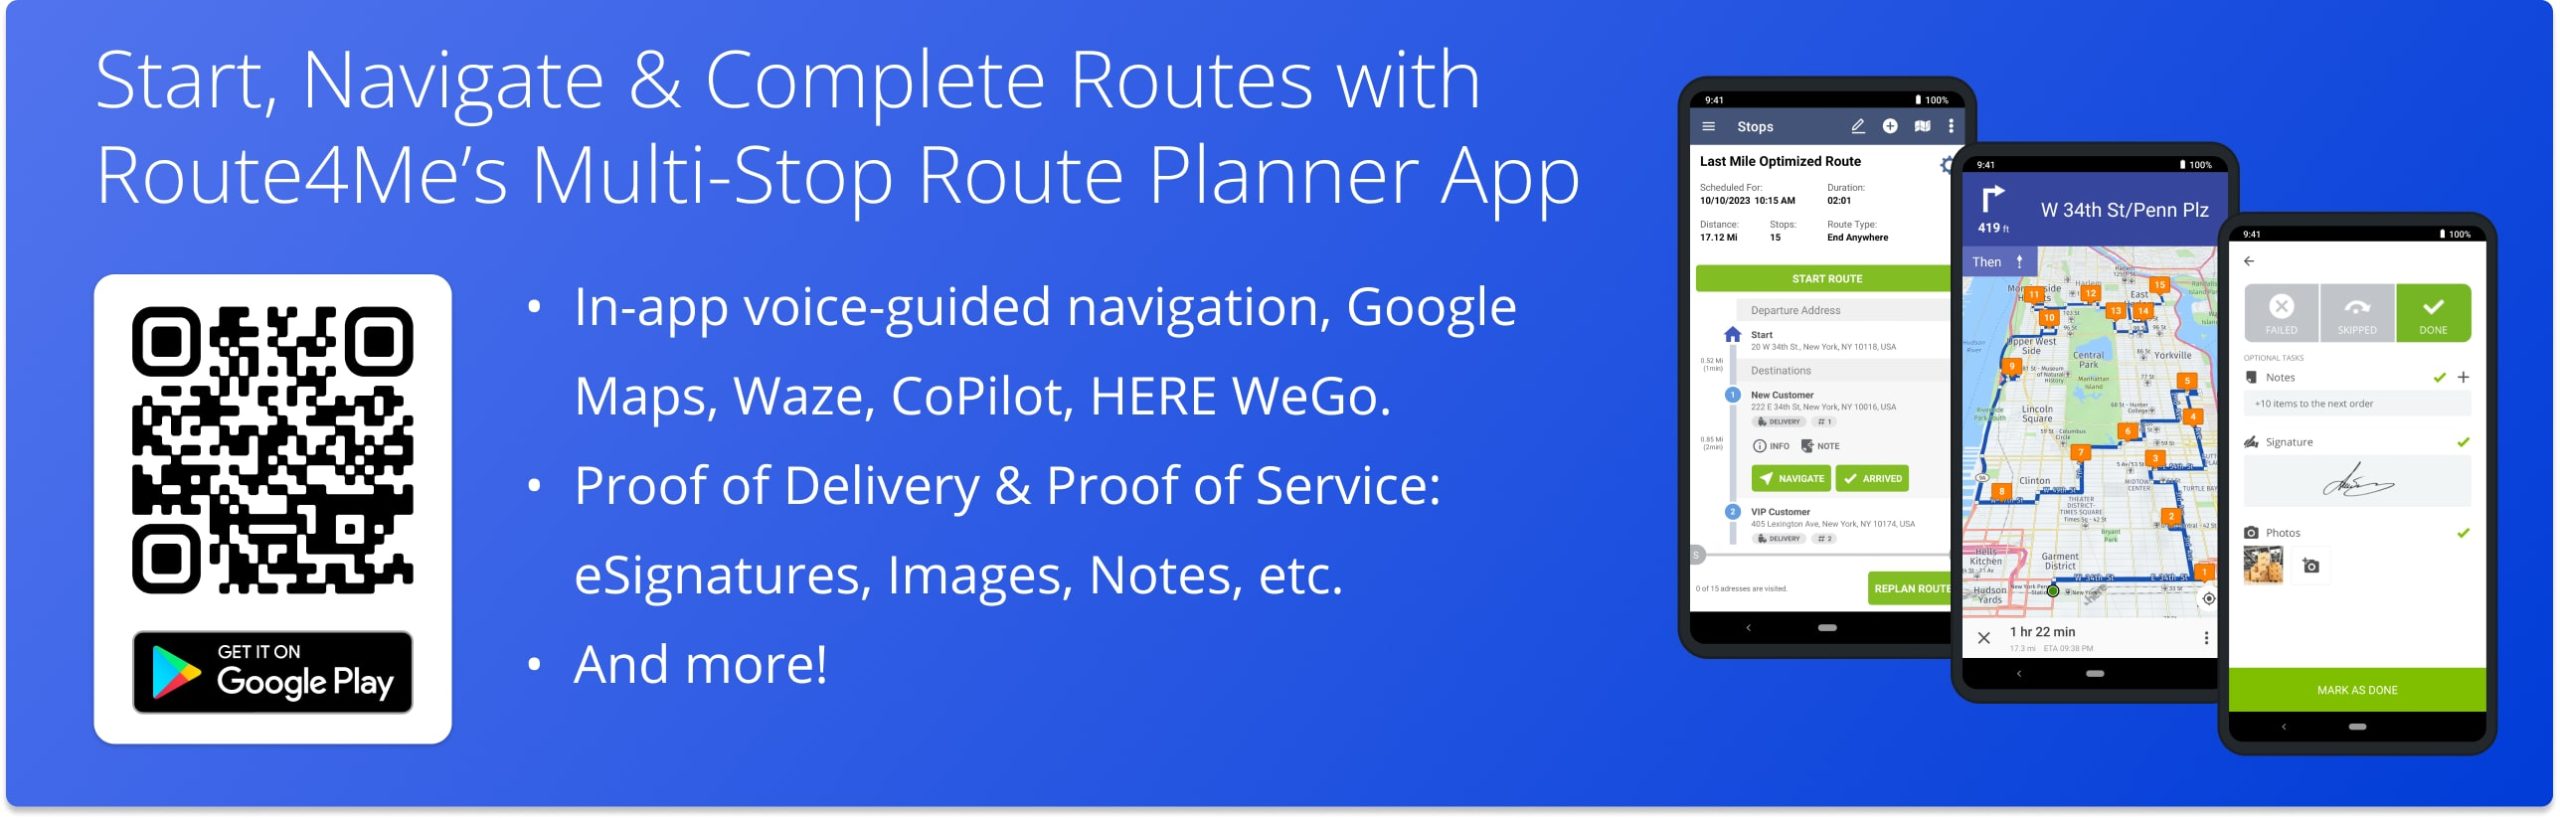 Start, navigate and complete routes and collect electronic proof of delivery and service using Route4Me's Android multi-stop route planner app.